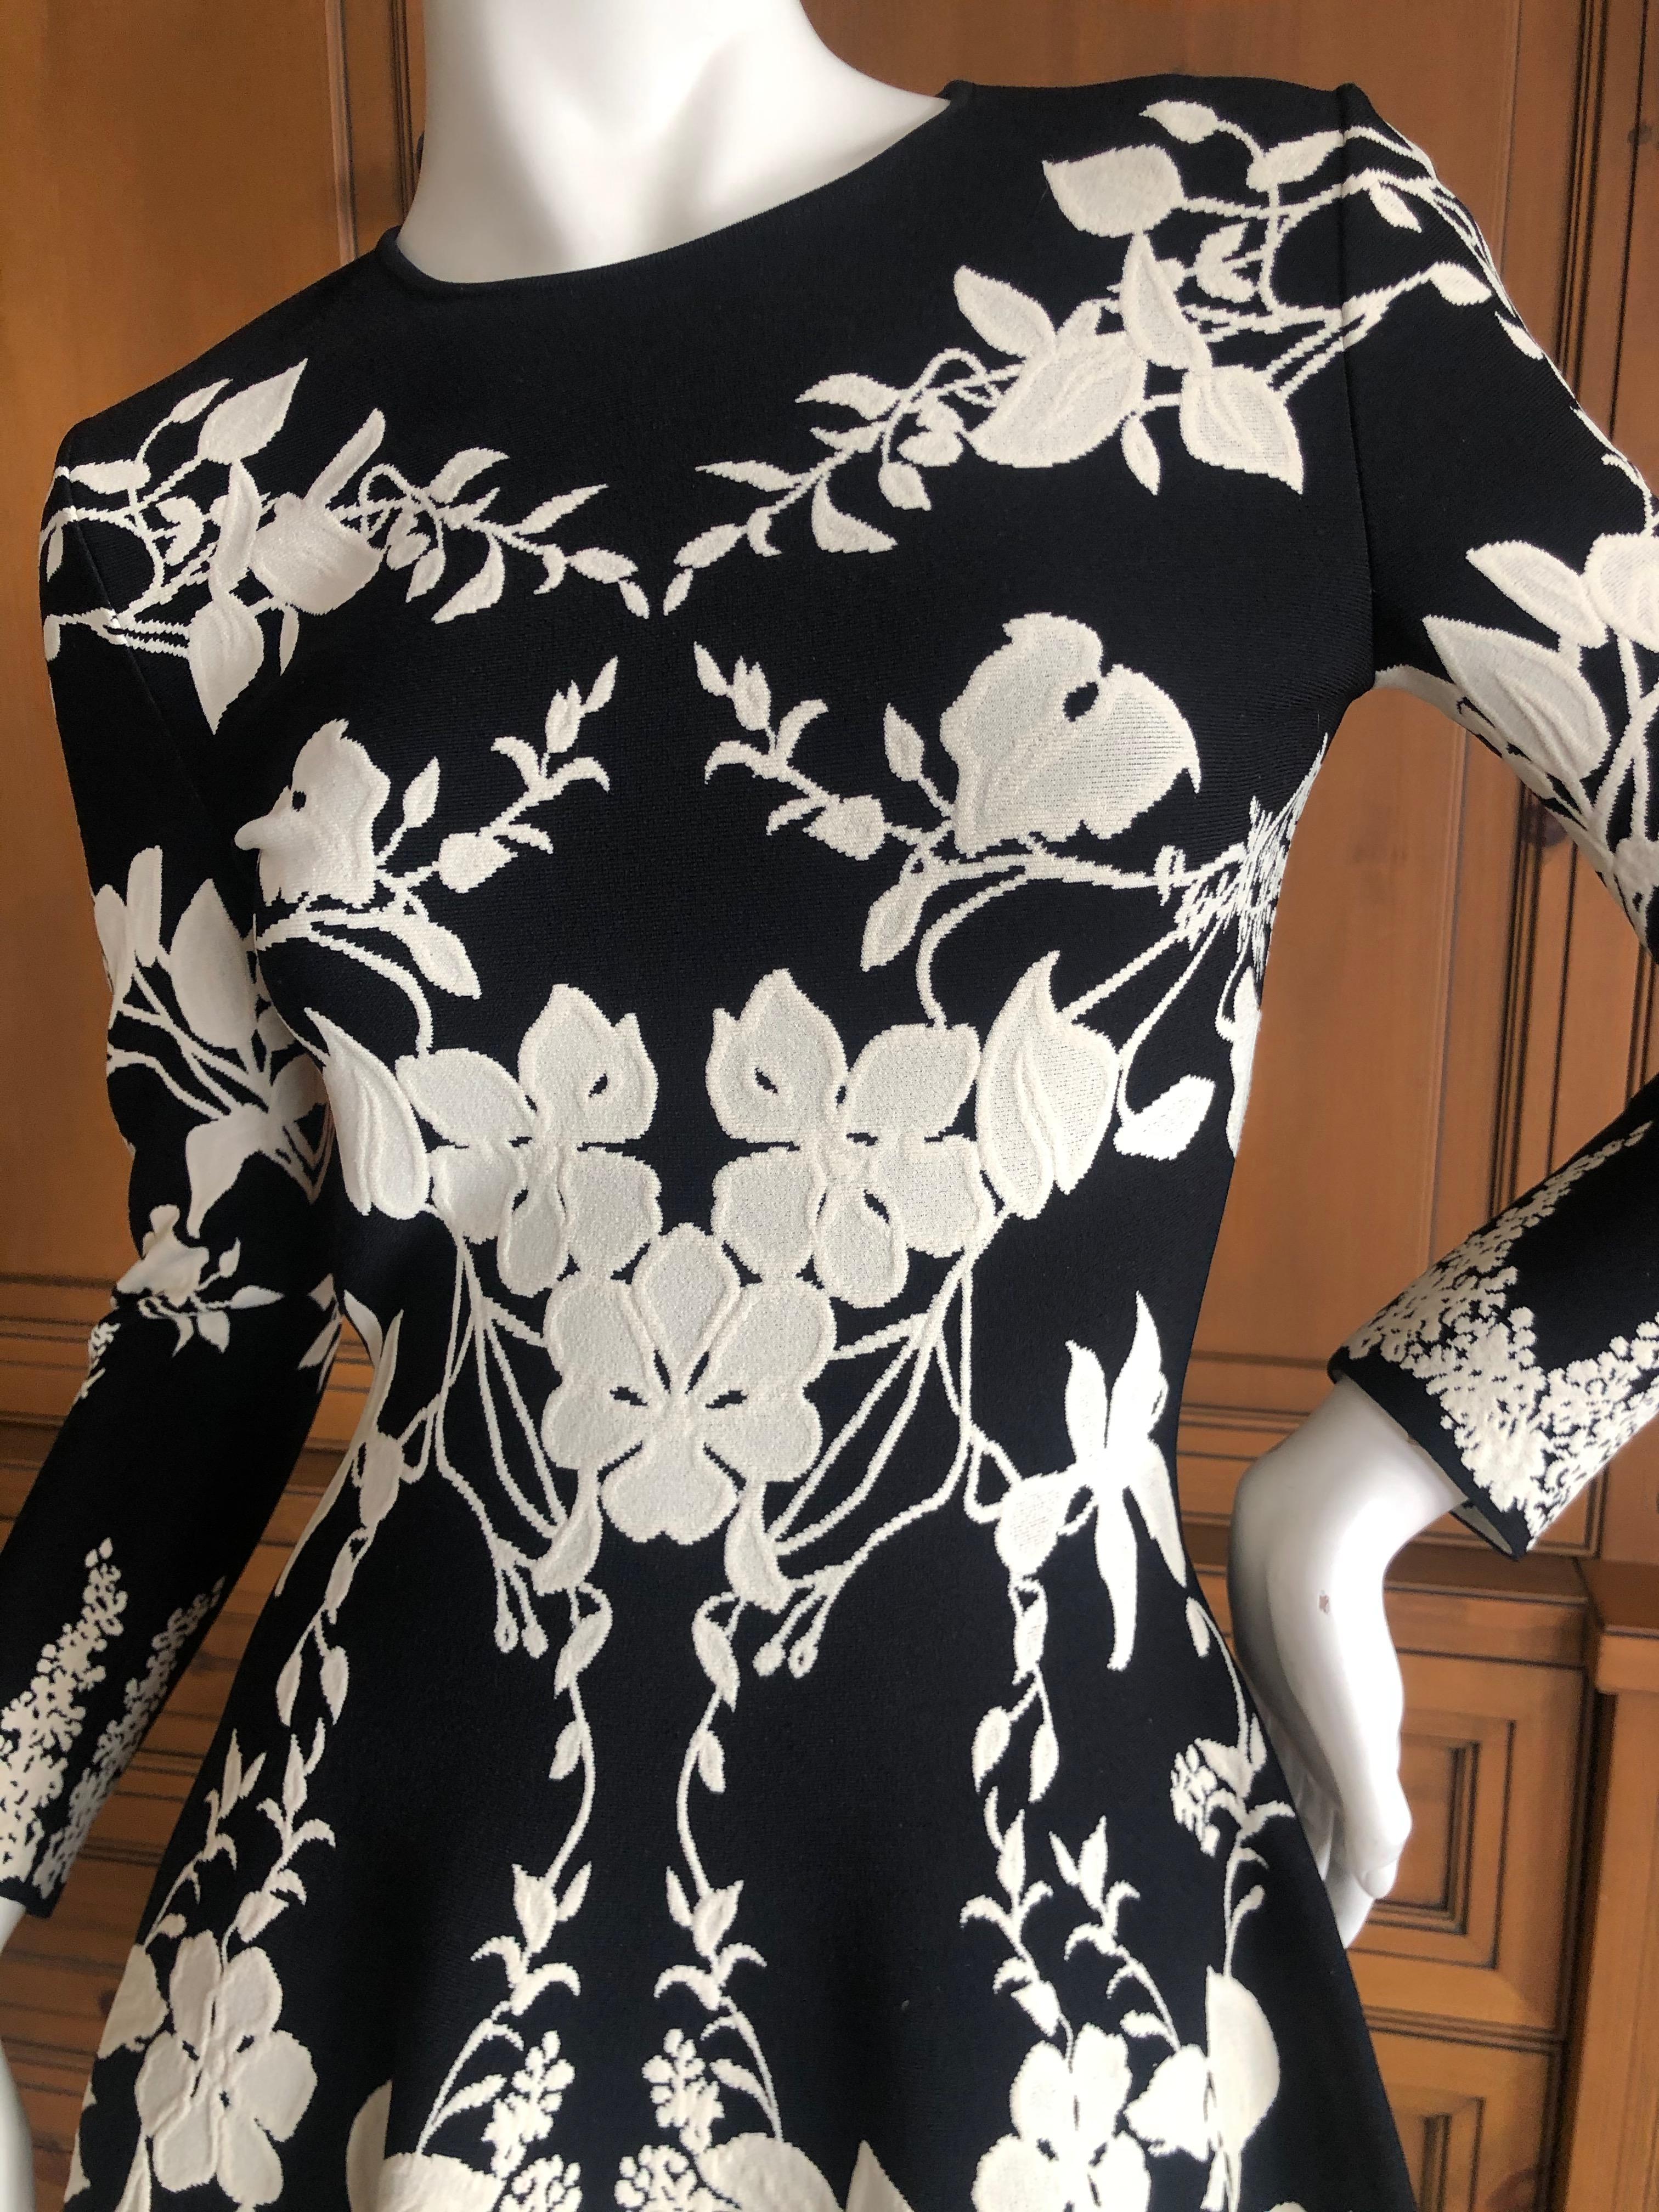 Alexander McQueen Black and White Inartsia Floral Knit Dress with Skater Skirt In Excellent Condition For Sale In Cloverdale, CA